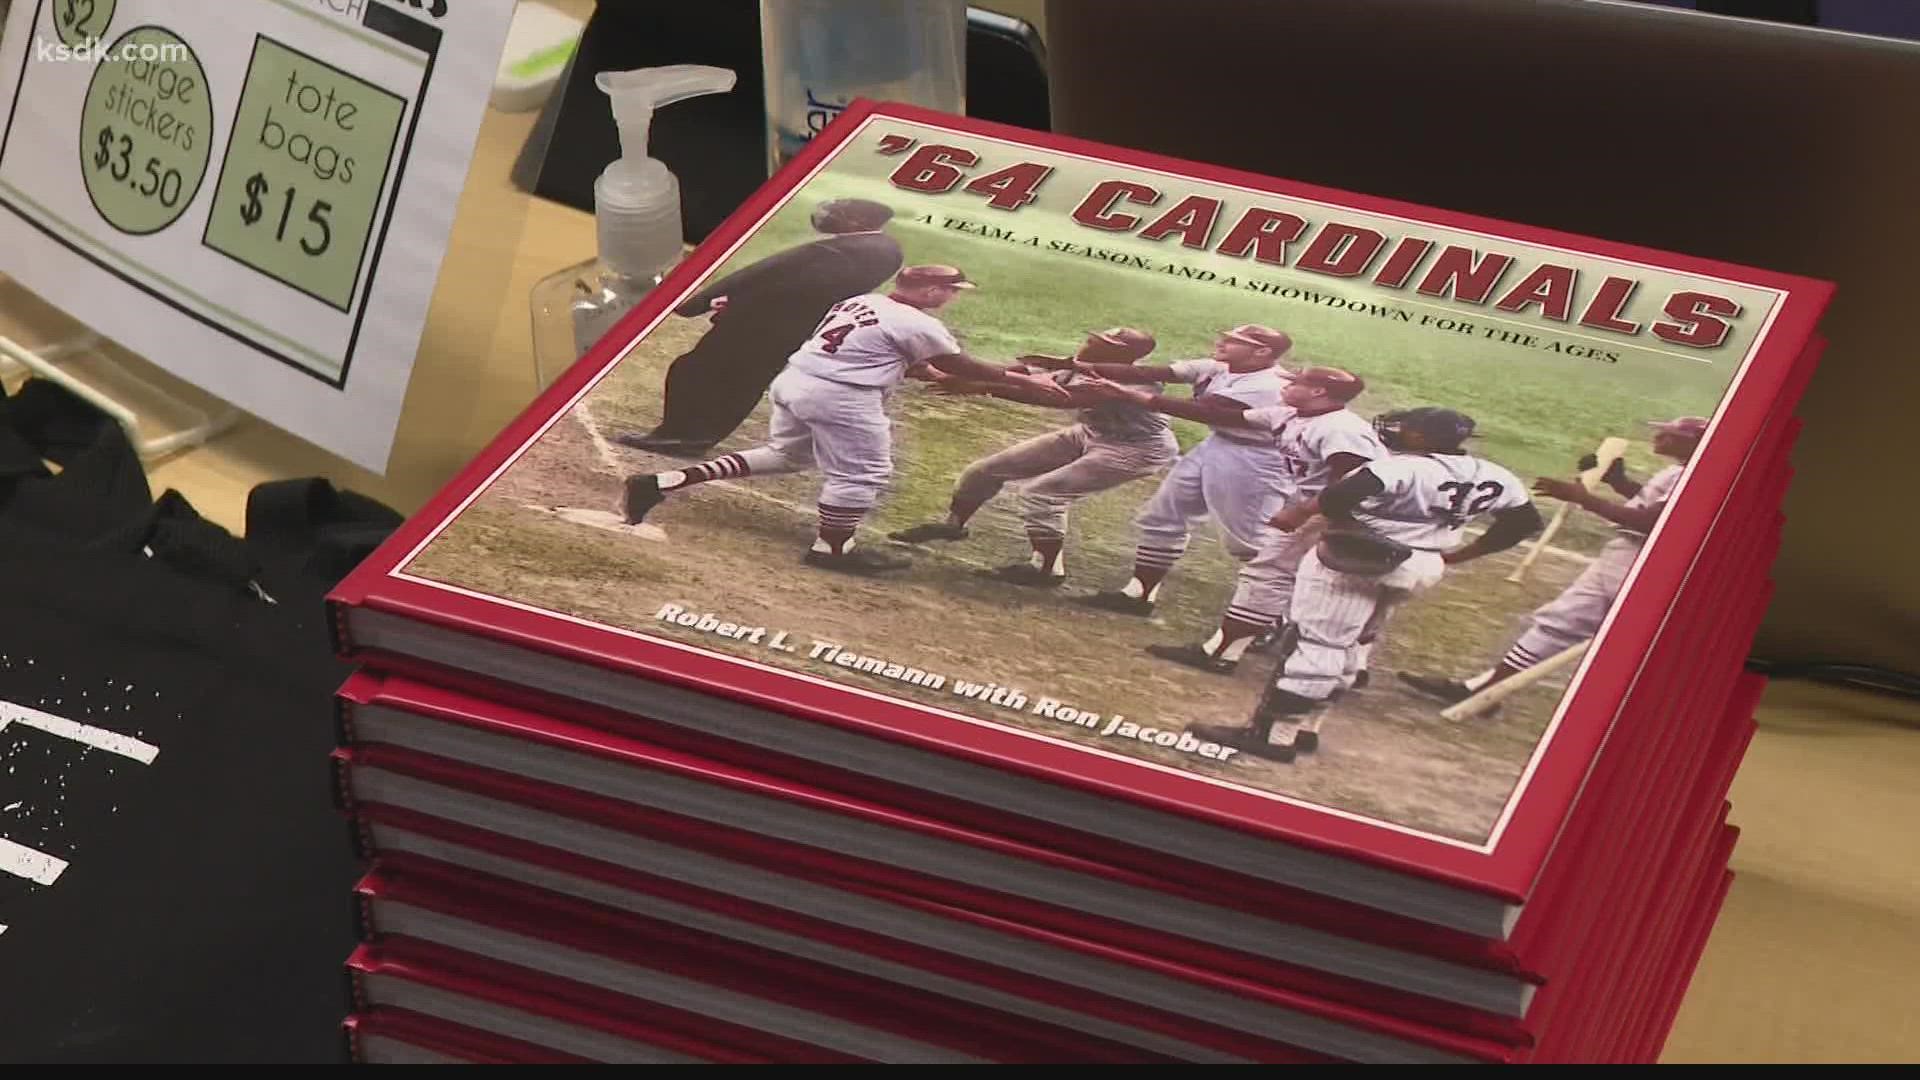 The new book is full of stories about one of the best Cardinals teams in franchise history.